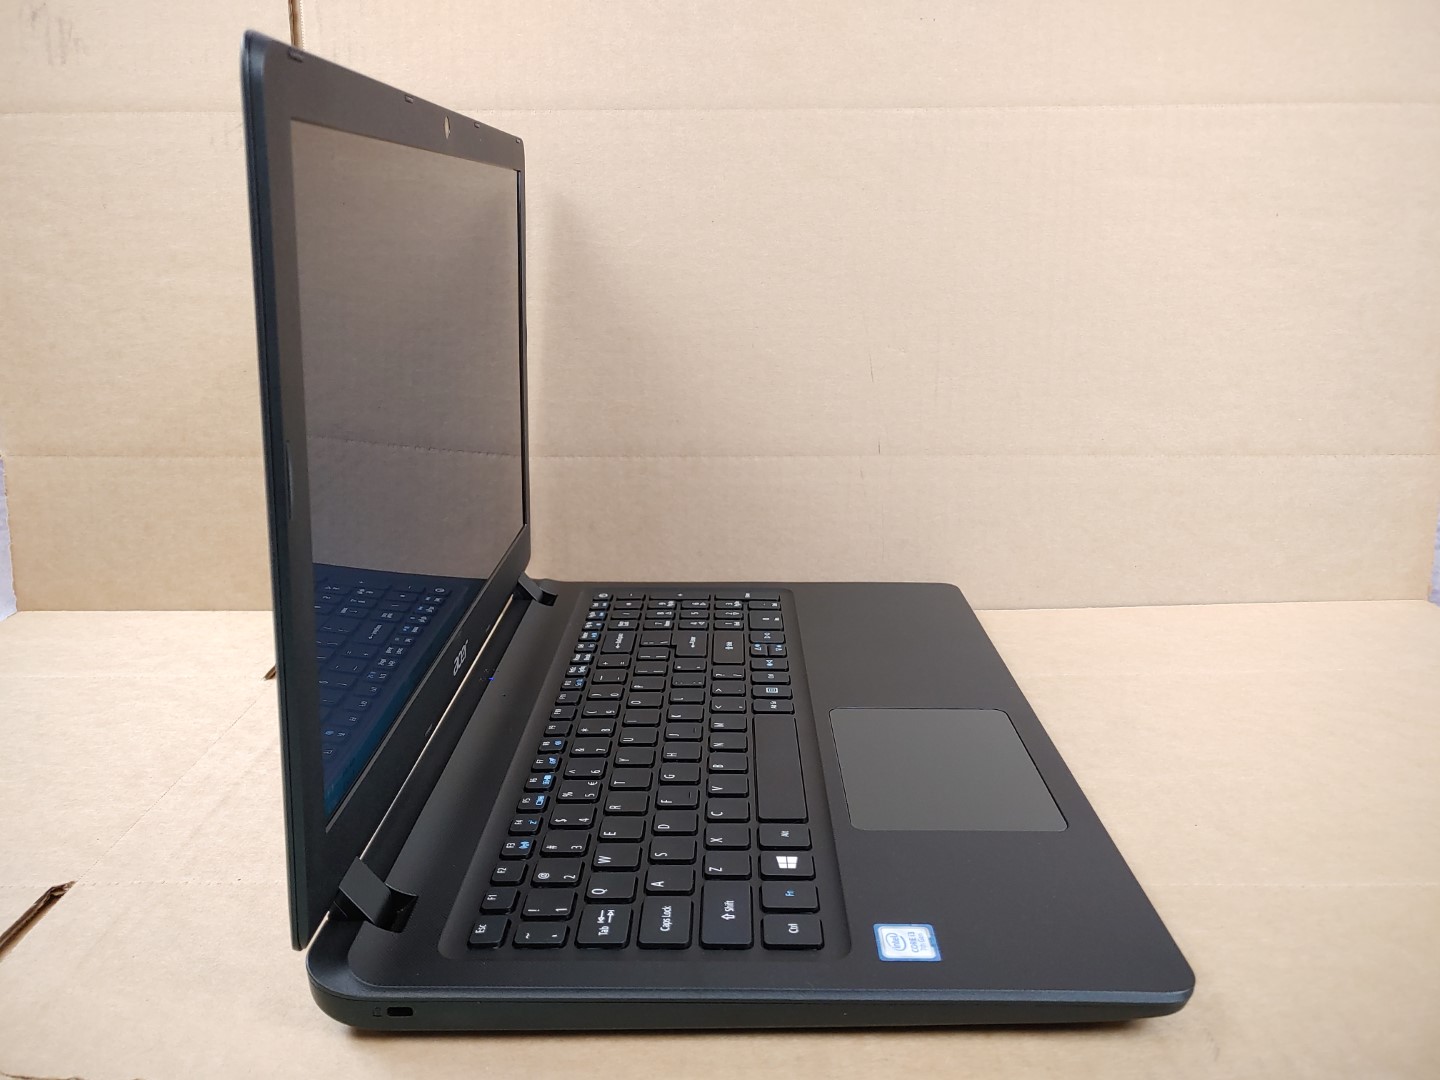 we have added actual images to this listing of the Acer Aspire you would receive. **NO POWER ADAPTER / NO SSD or HDD/ NO OS**Item Specifics: MPN : Aspire ES1-572UPC : N/AType : LaptopBrand : AcerProduct Line : AspireModel : Aspire ES1-572-321GOperating System : N/AScreen Size : 15.6-inchProcessor Type : Intel Core i3-7100U 7th GenProcessor Speed : 2.40GHzGraphics Processing Type : N/AMemory : 8GBHard Drive Capacity : N/A - 1